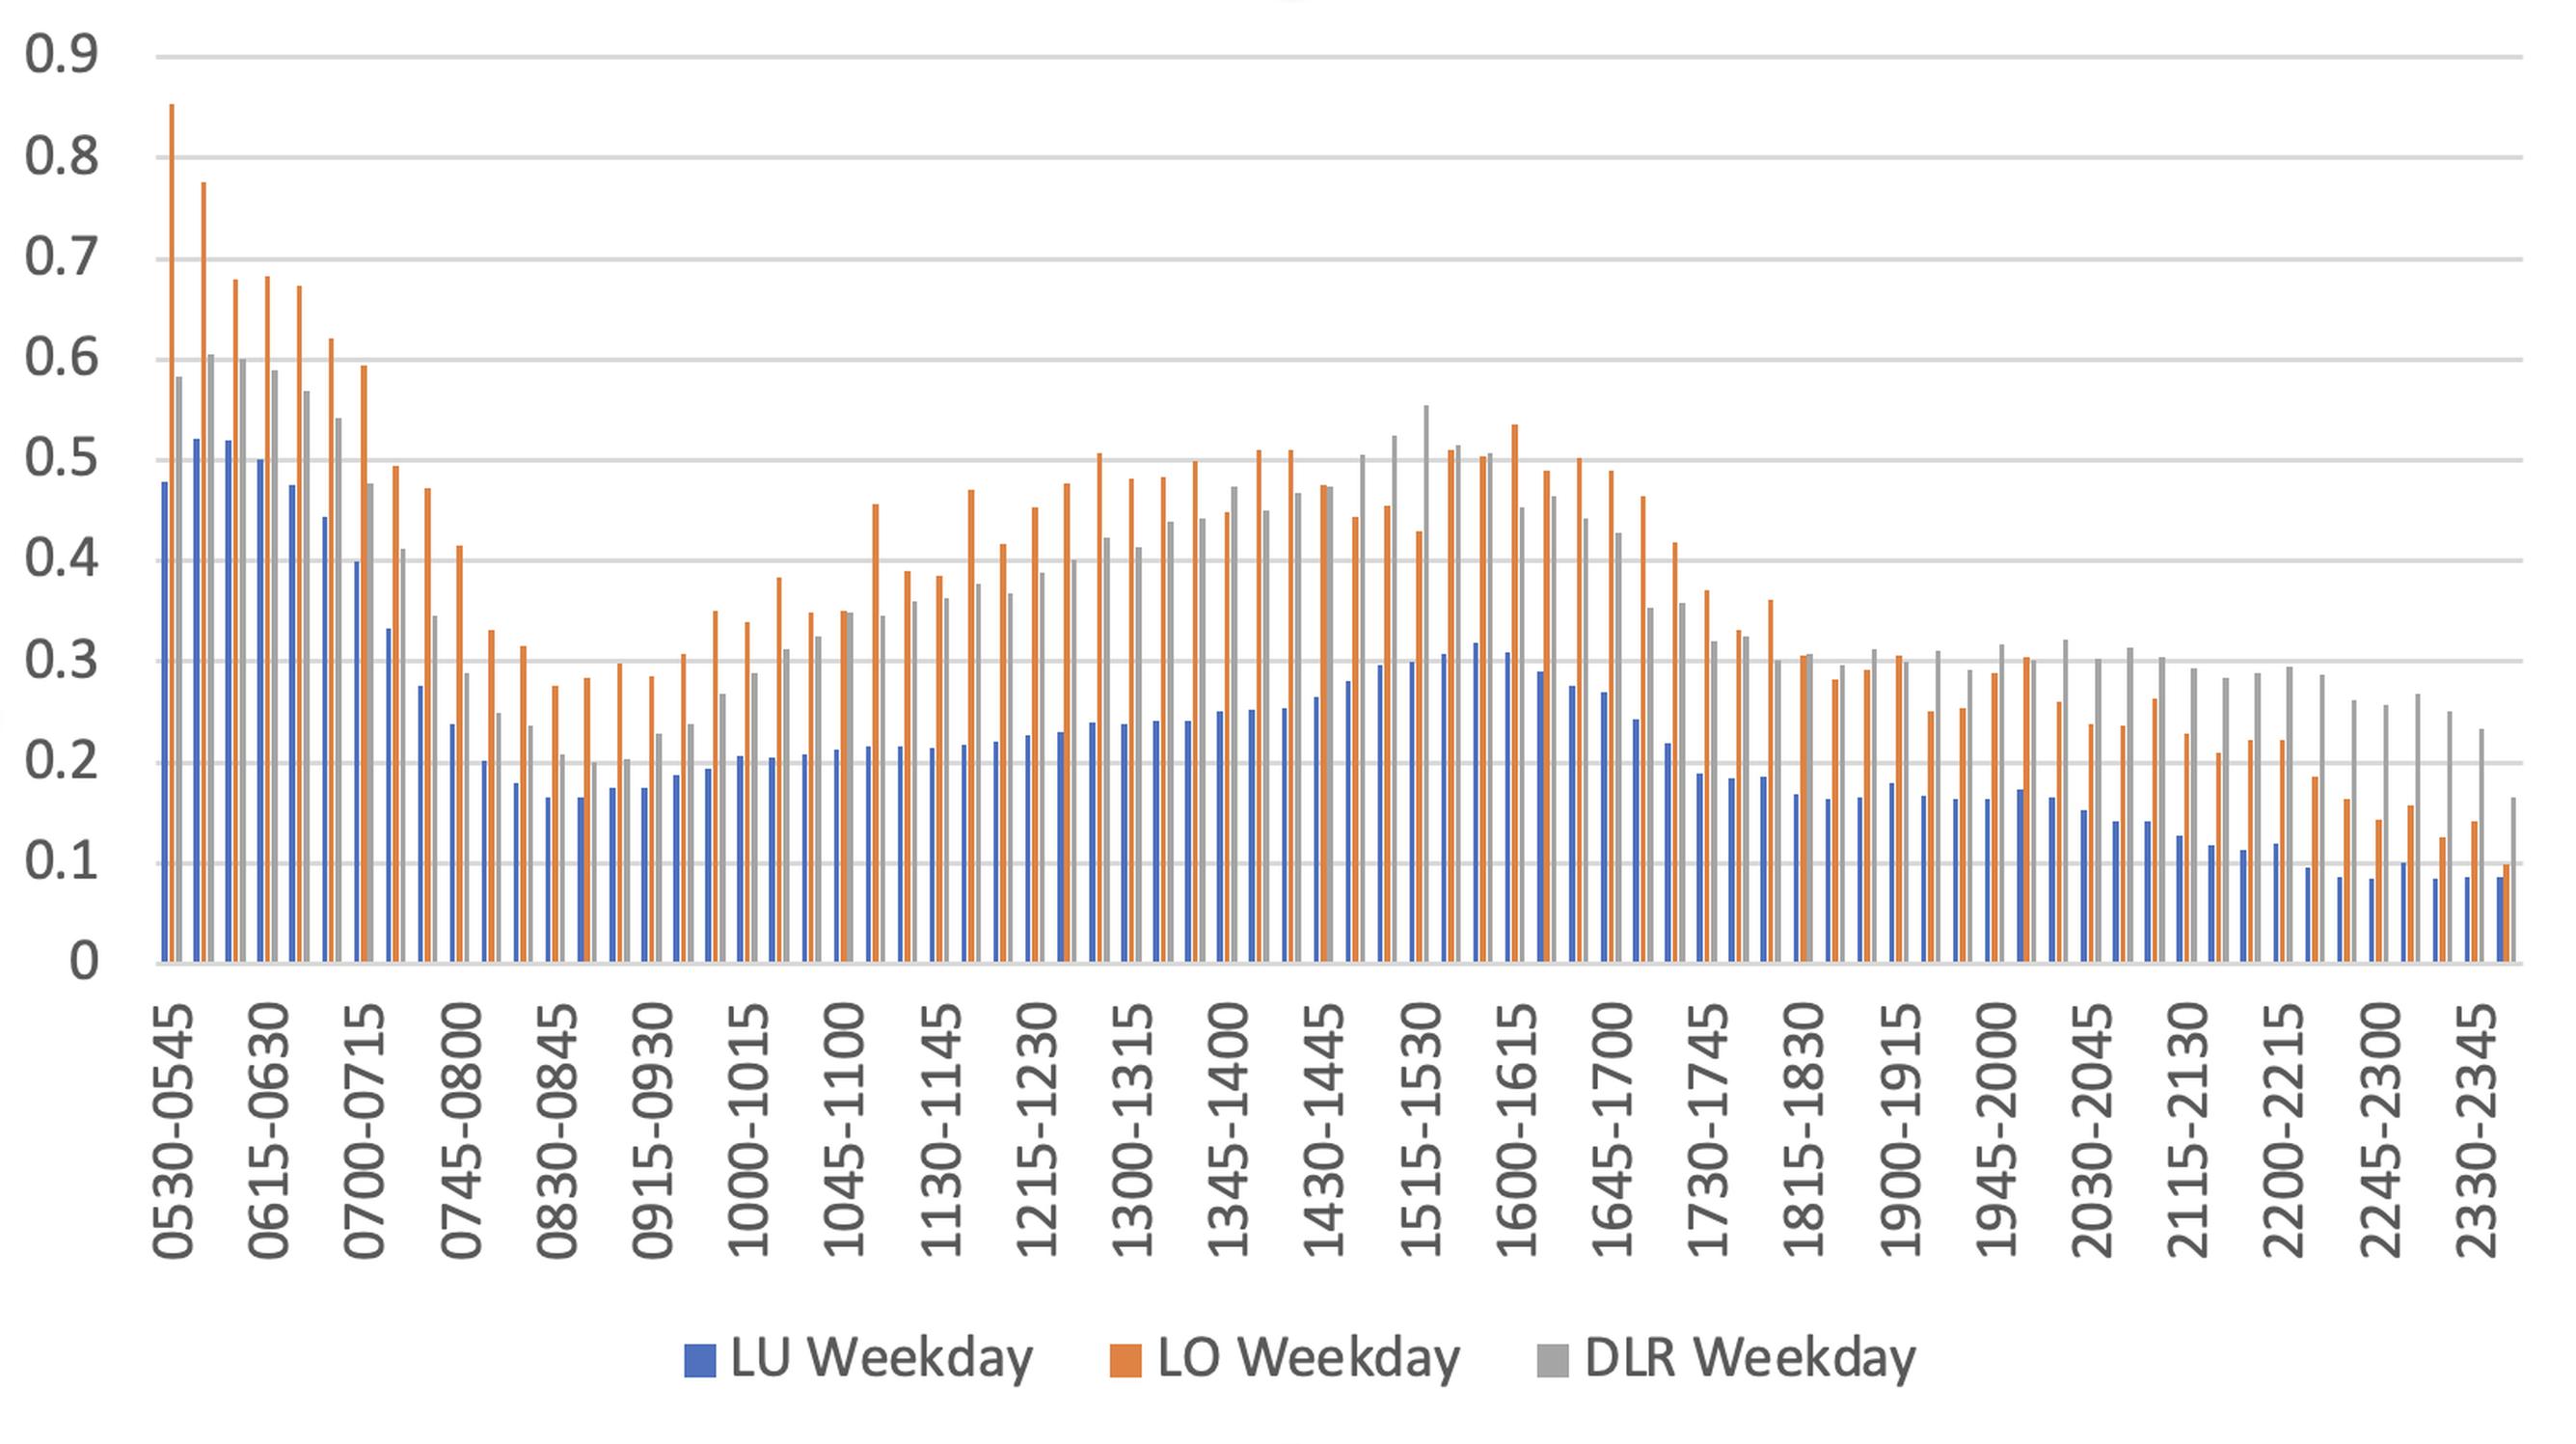 Figure 1: 2020 Weekday entrants into TfL stations compared with 2019 level, by 15-minute segments. Source: Transport for London